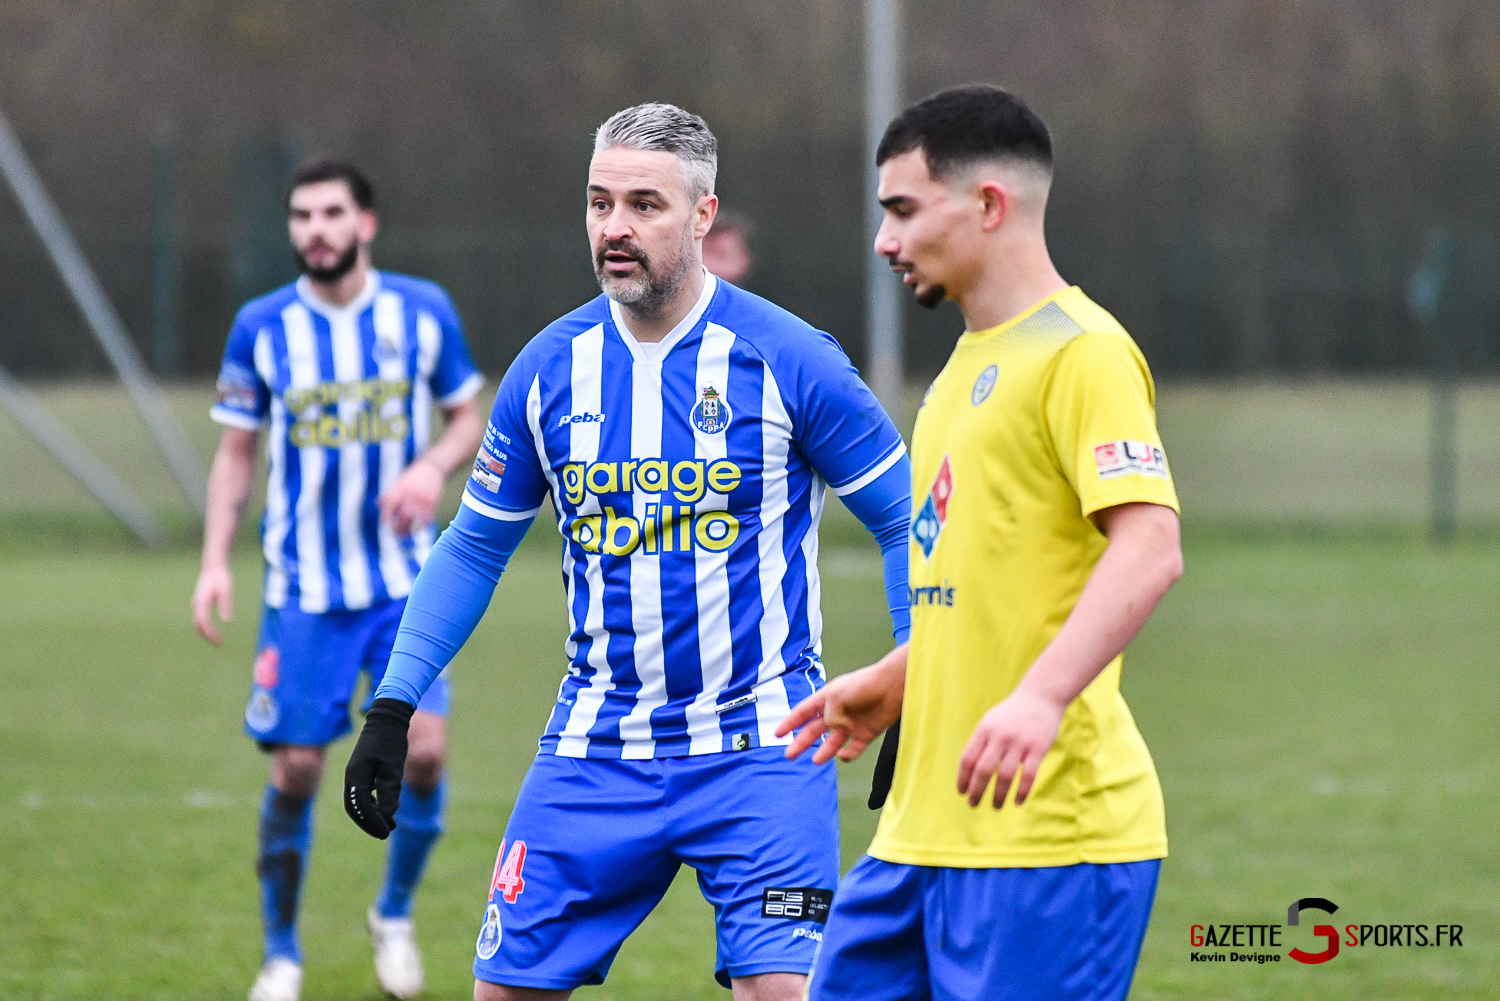 Football – Benoit Sturbois: “The goal is not to change, but to improve”